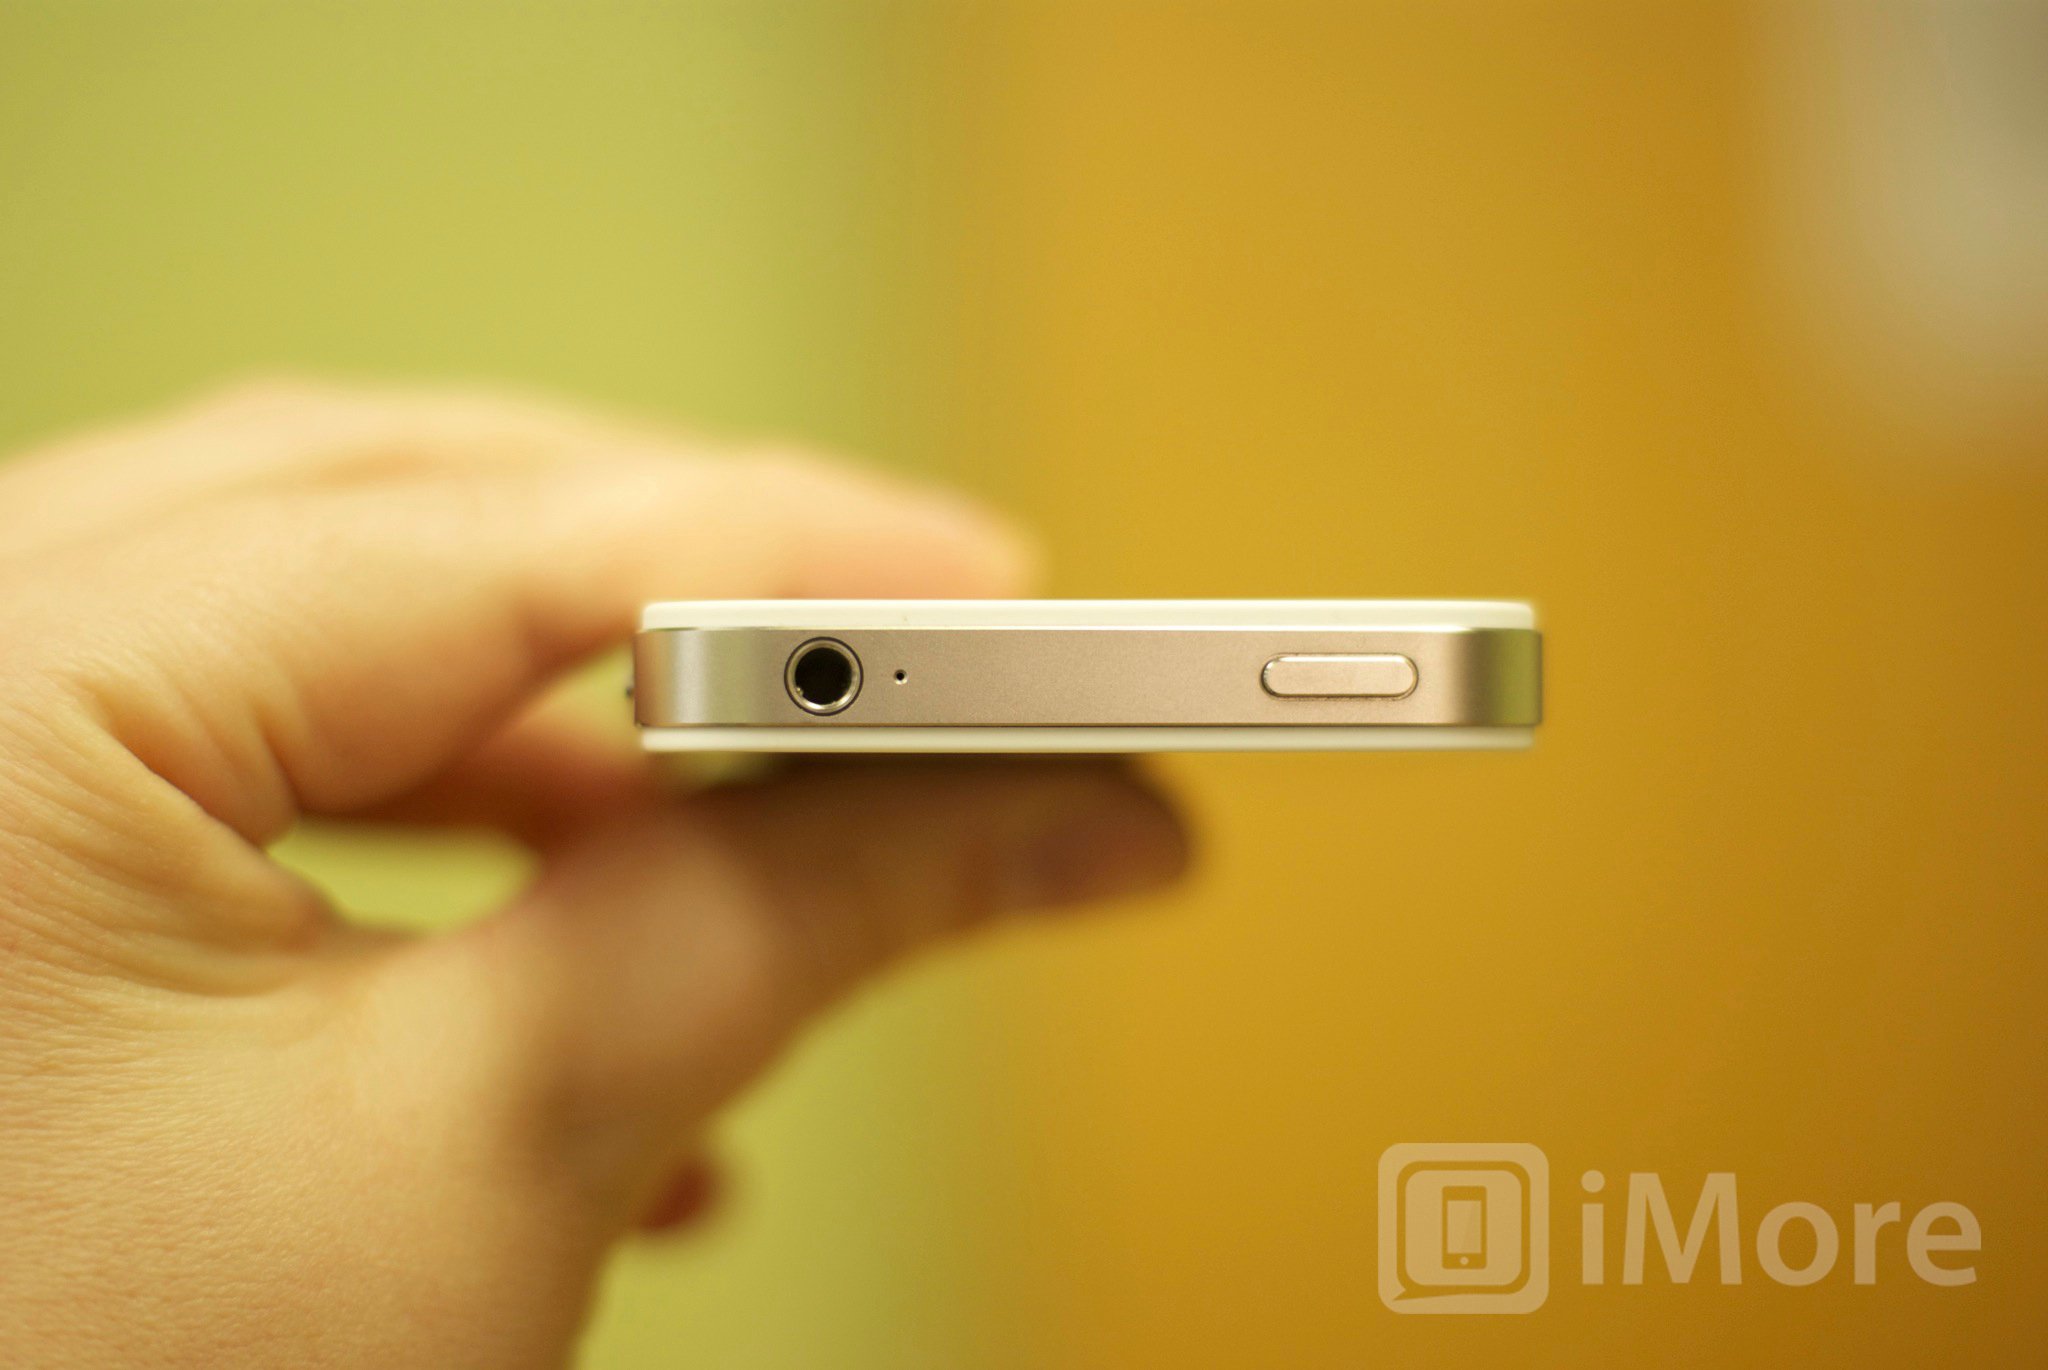 Check the water sensor inside the headphone jack of the iPhone 4